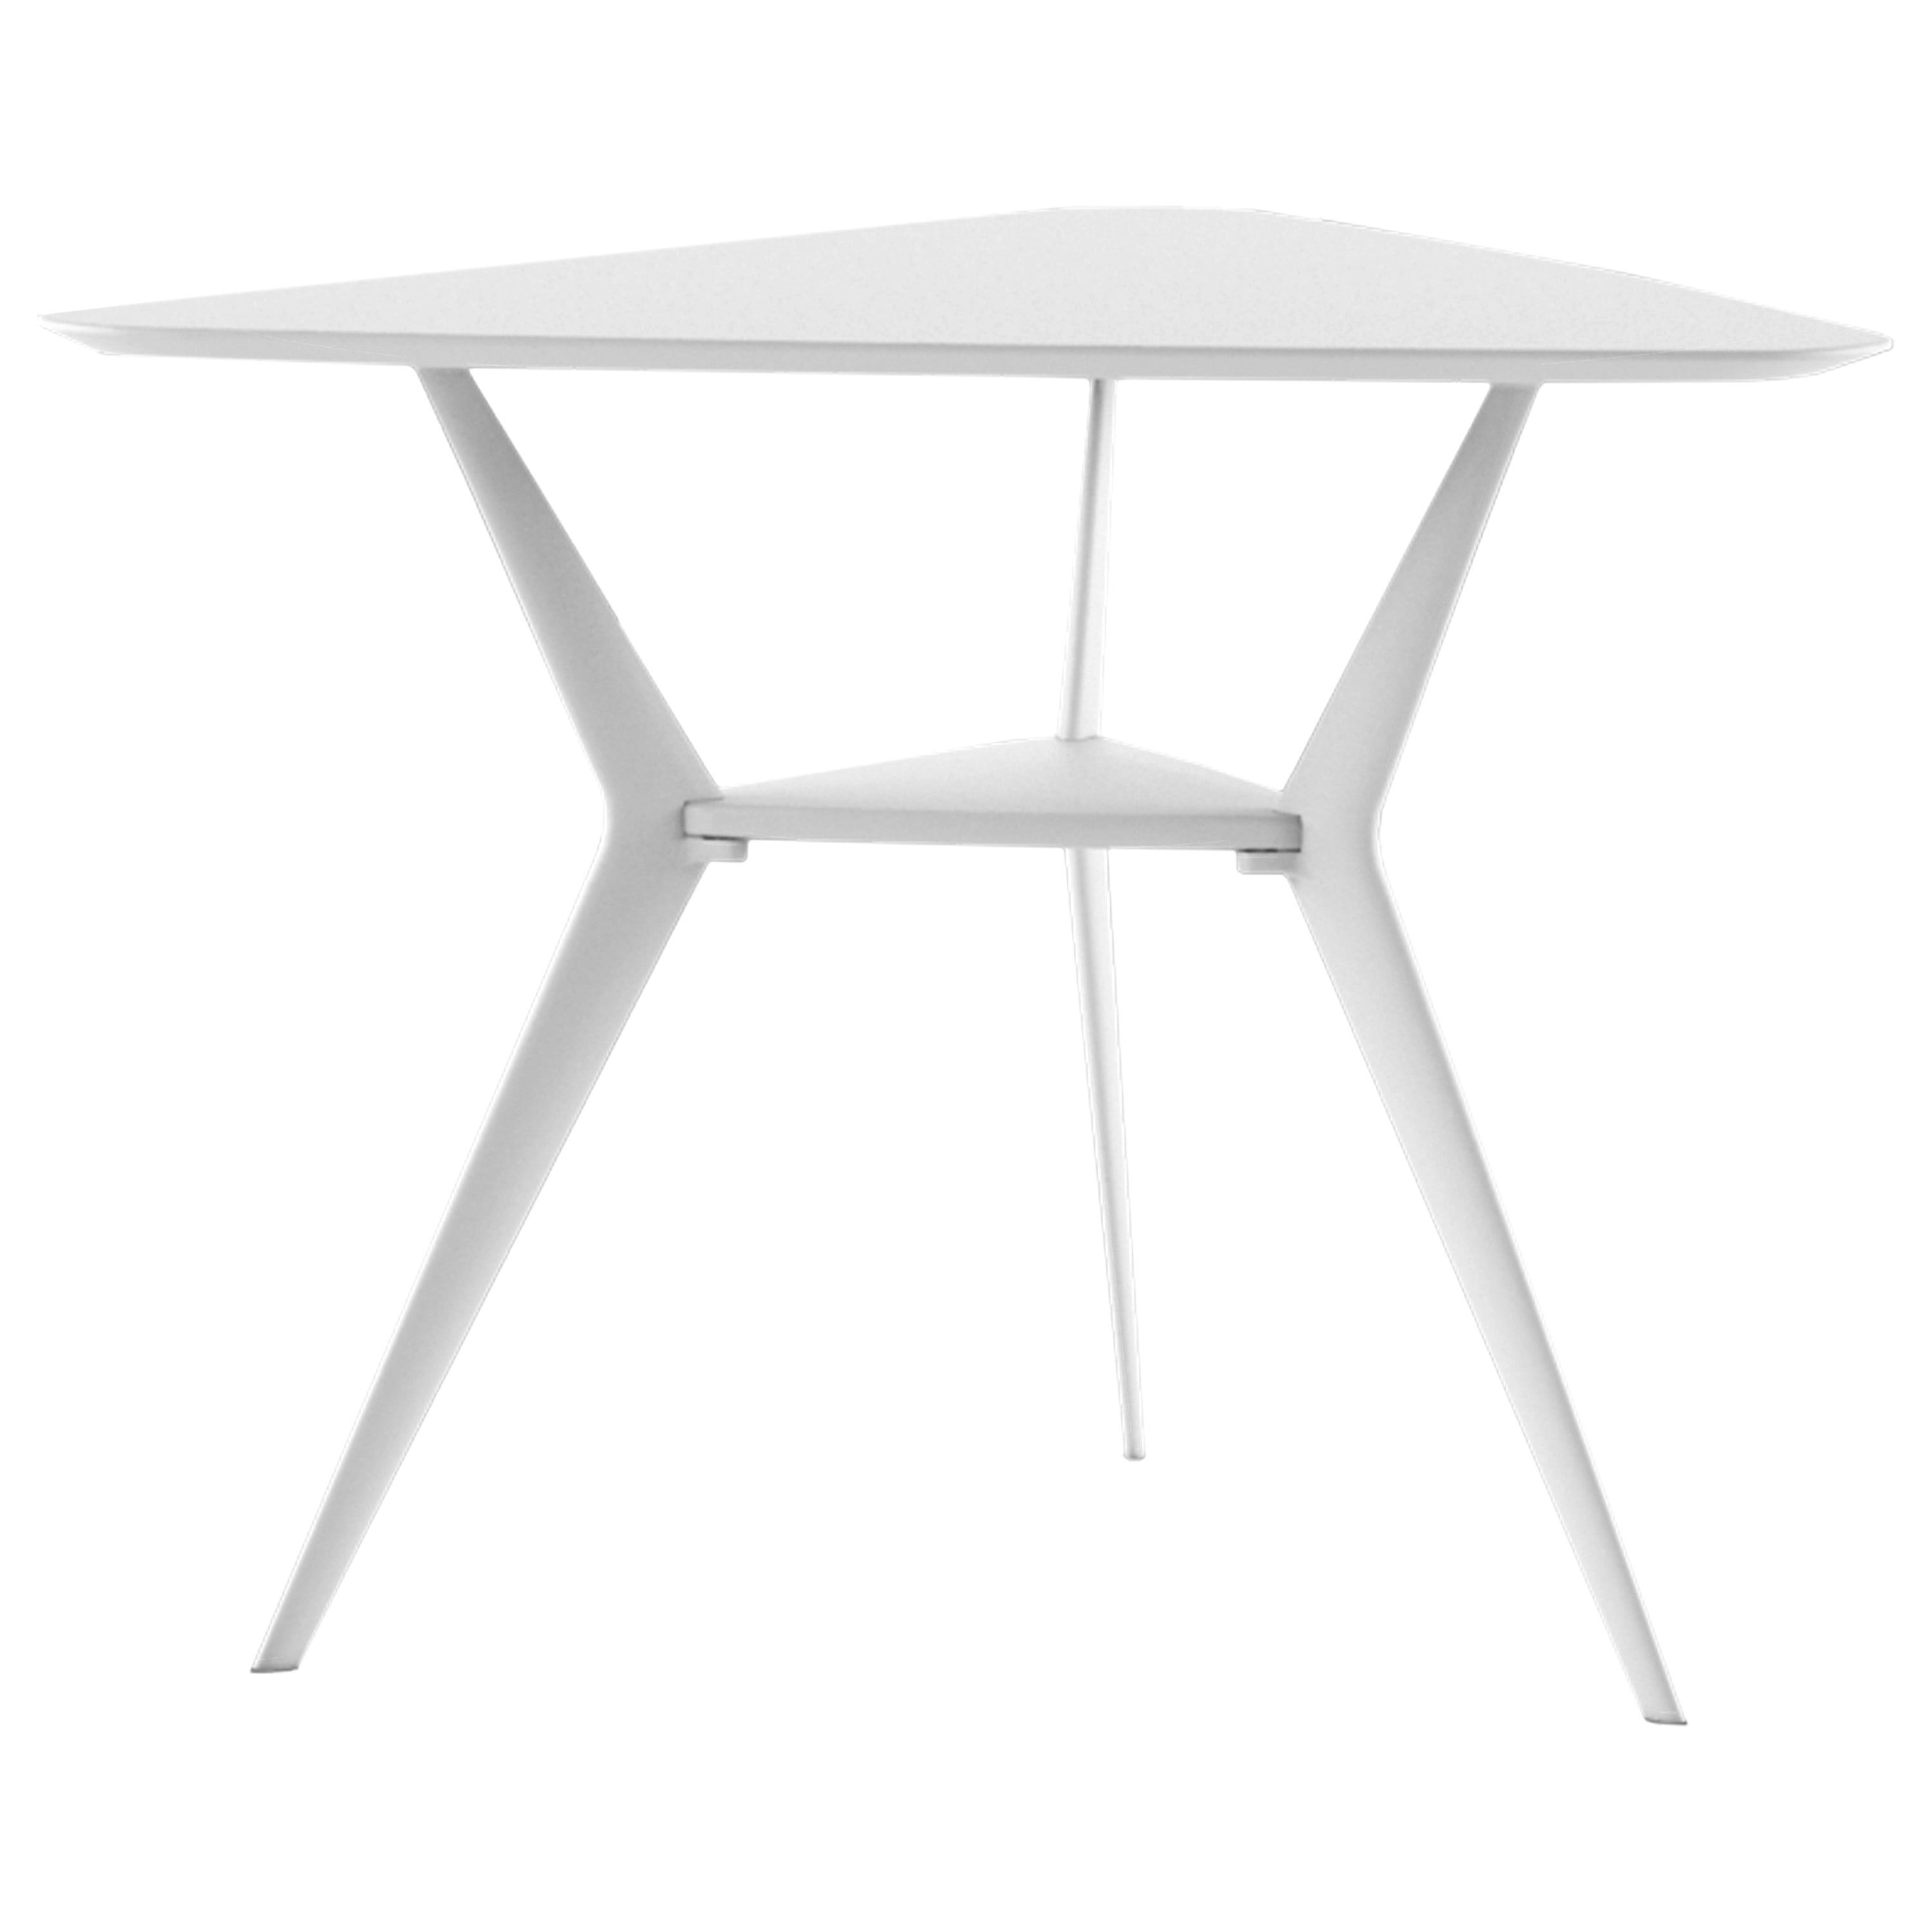 Alias B01 Biplane XS Triangular Outdoor Table in White Top and Lacquered Frame For Sale